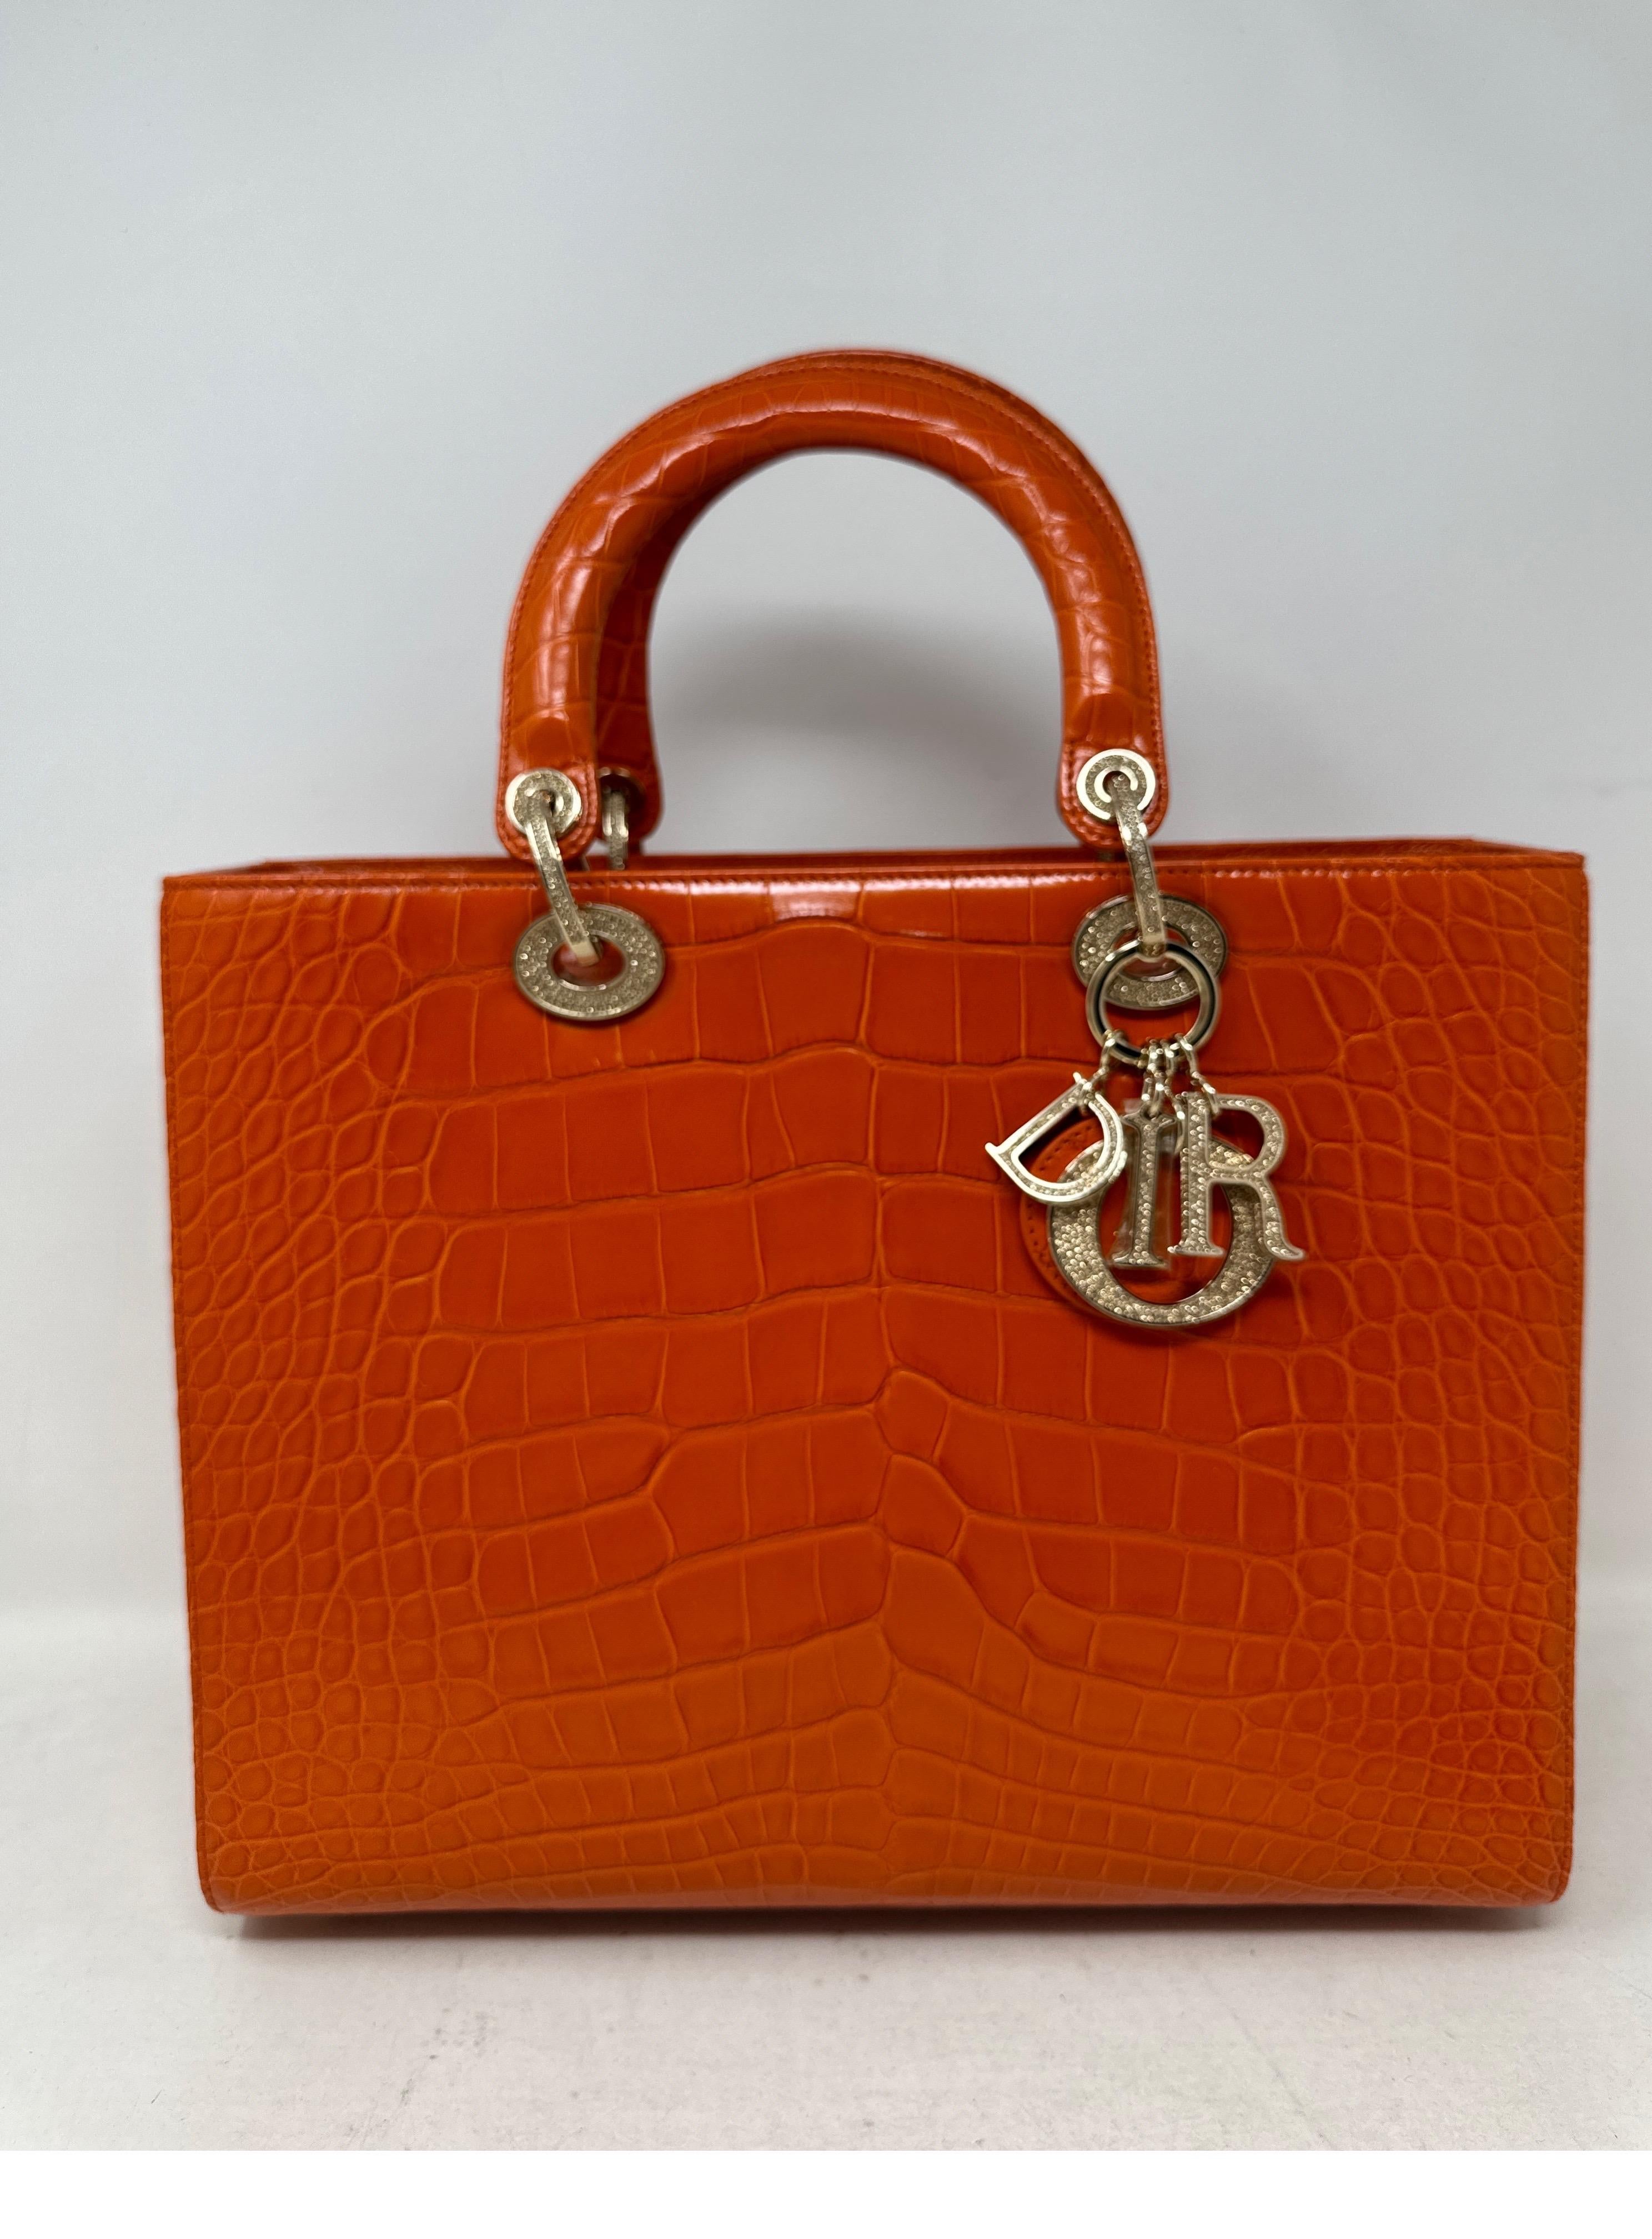 Christian Dior Lady Dior Orange Alligator Bag. Stunning brand new 2023 large Lady Dior Bag with swarovski crystals. Bag has never been used. Rare alligator skin with Cites paperwork. Extremely rare and comes full set with original receipts and all